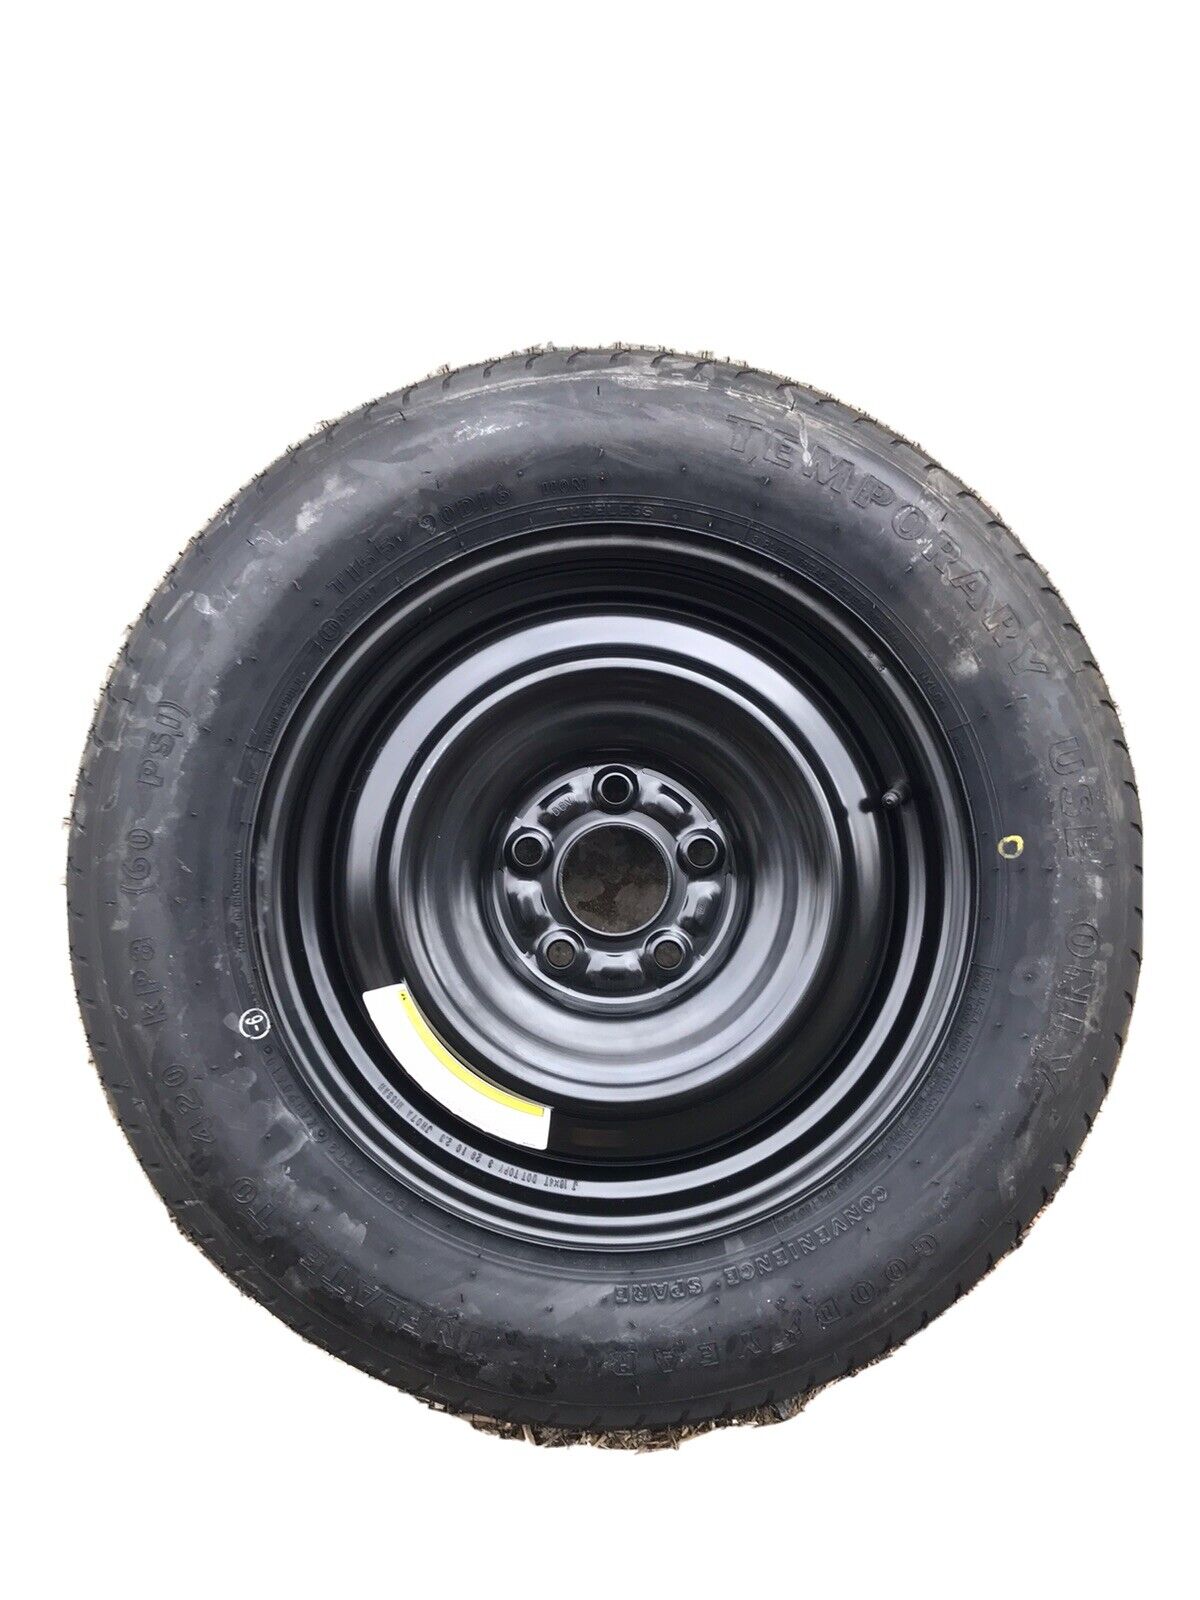 2008 - 2013 NISSAN ROGUE SPARE TIRE T155/90D16